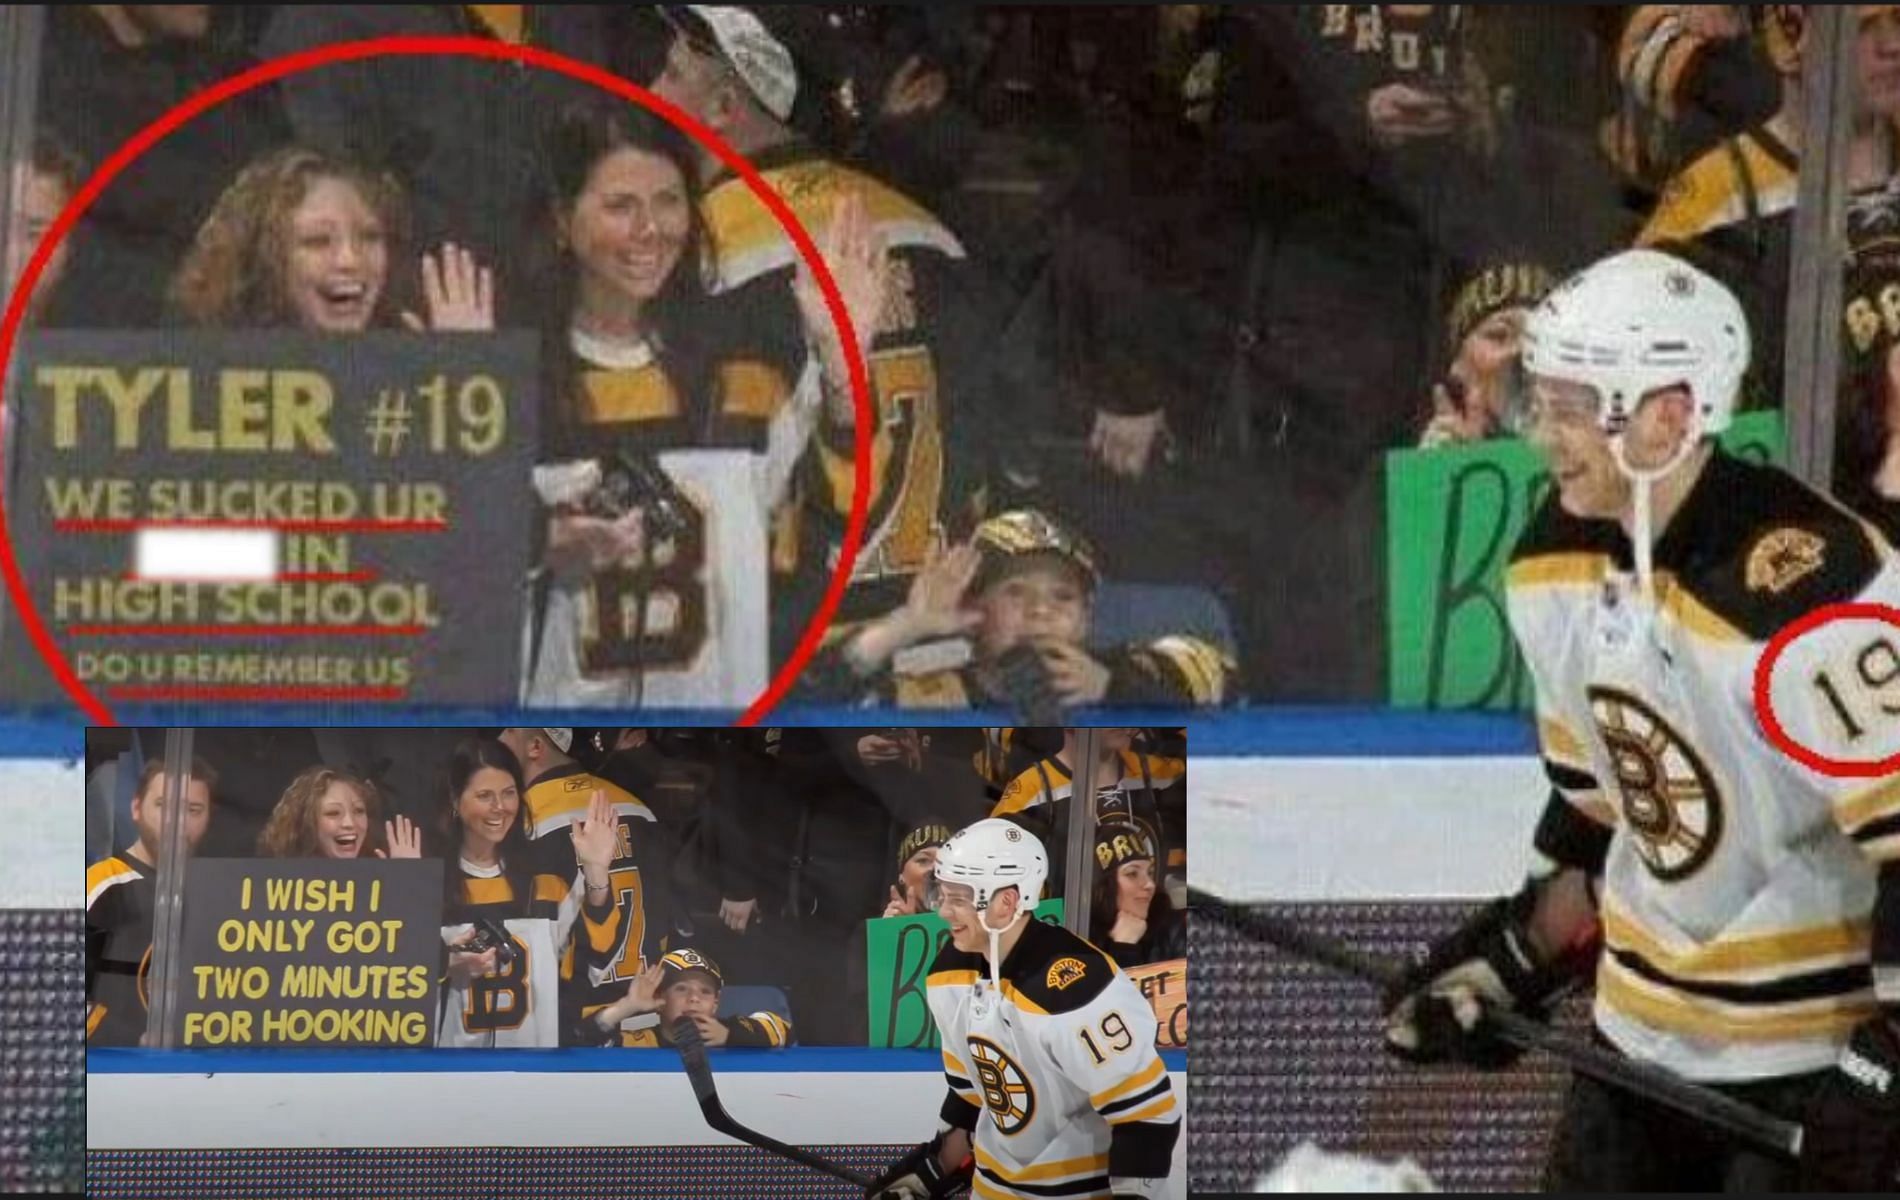 Was viral Tyler Seguin sign real?